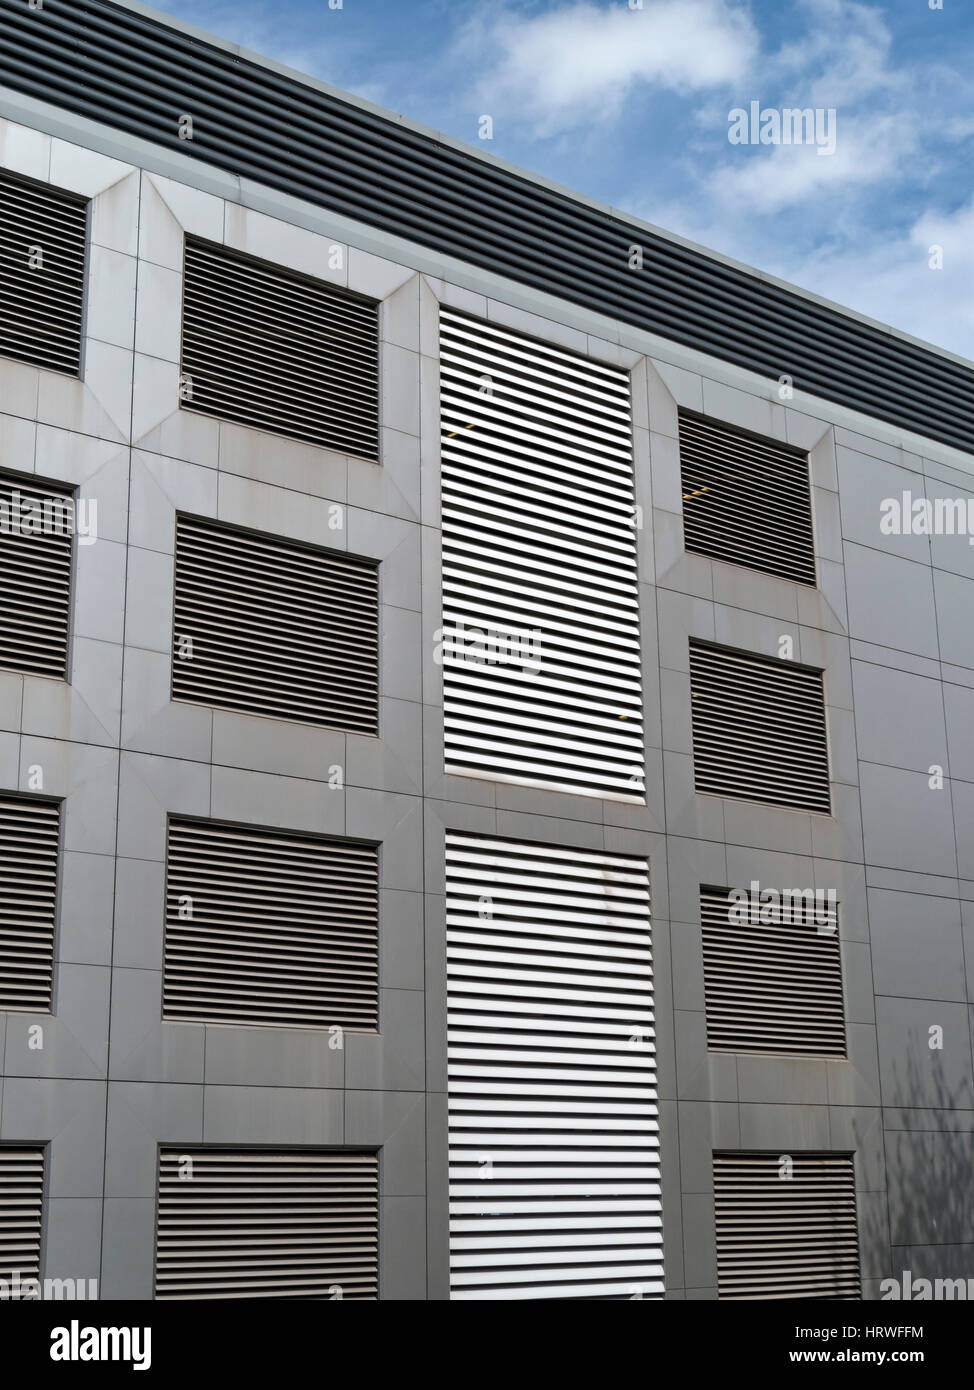 Metal cladding (sidings) on St. Andrews multi-storey car park in Norwich, England, UK Stock Photo